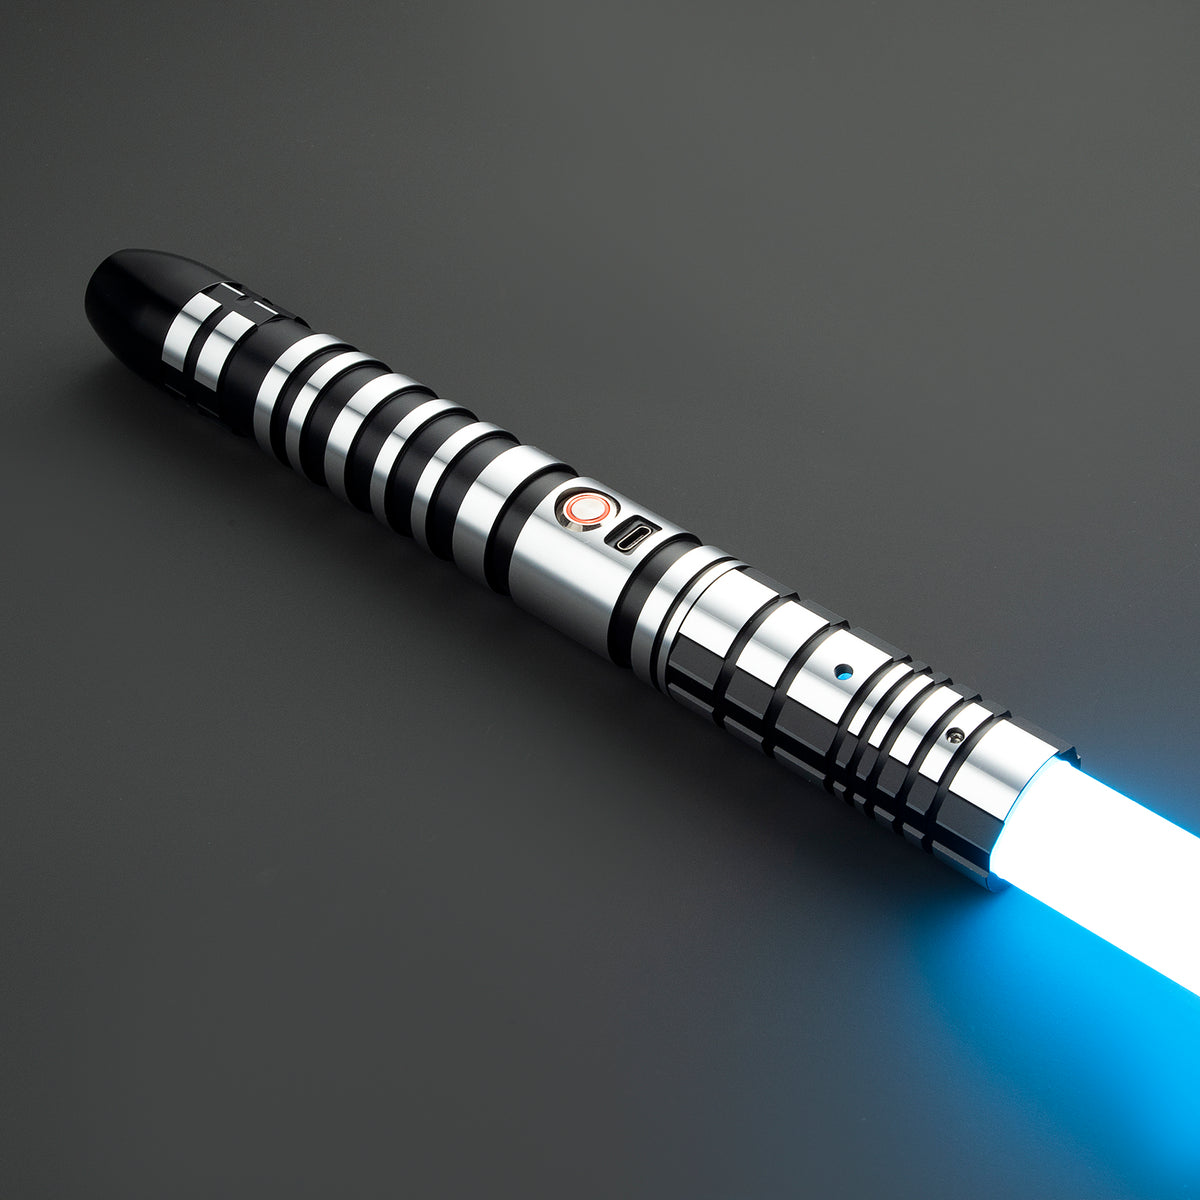 The Armored Lightsaber